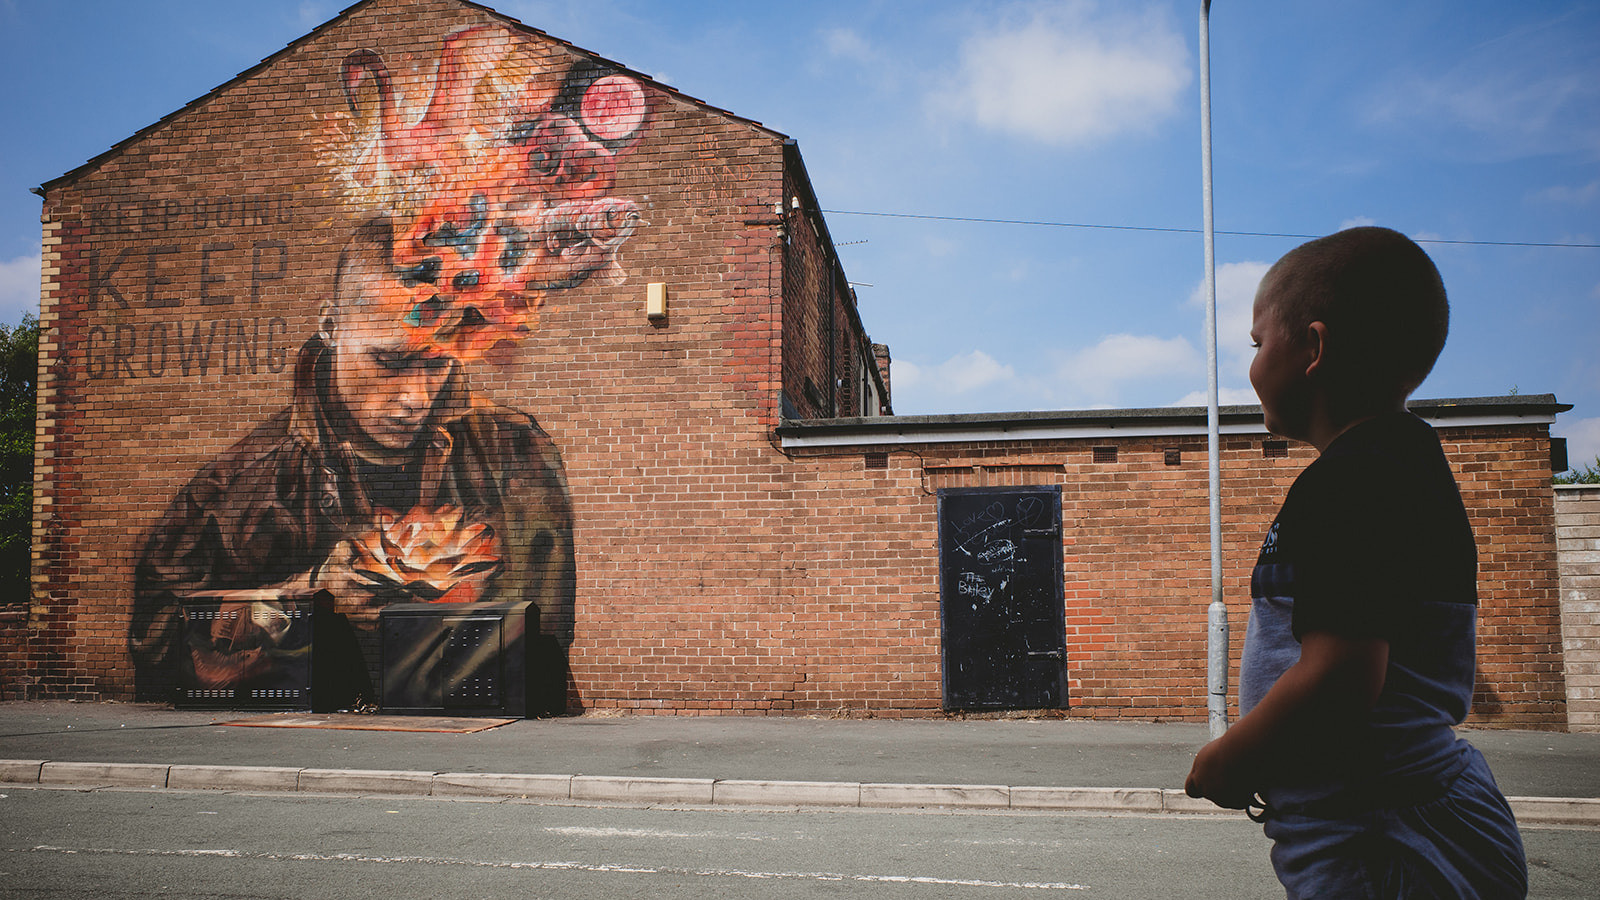 A child stands silhouetted buy a bright sunny day, they are looking at a building across the road and on the red brick wall there is a large mural painting of a person with a coloured burst rising from their head.